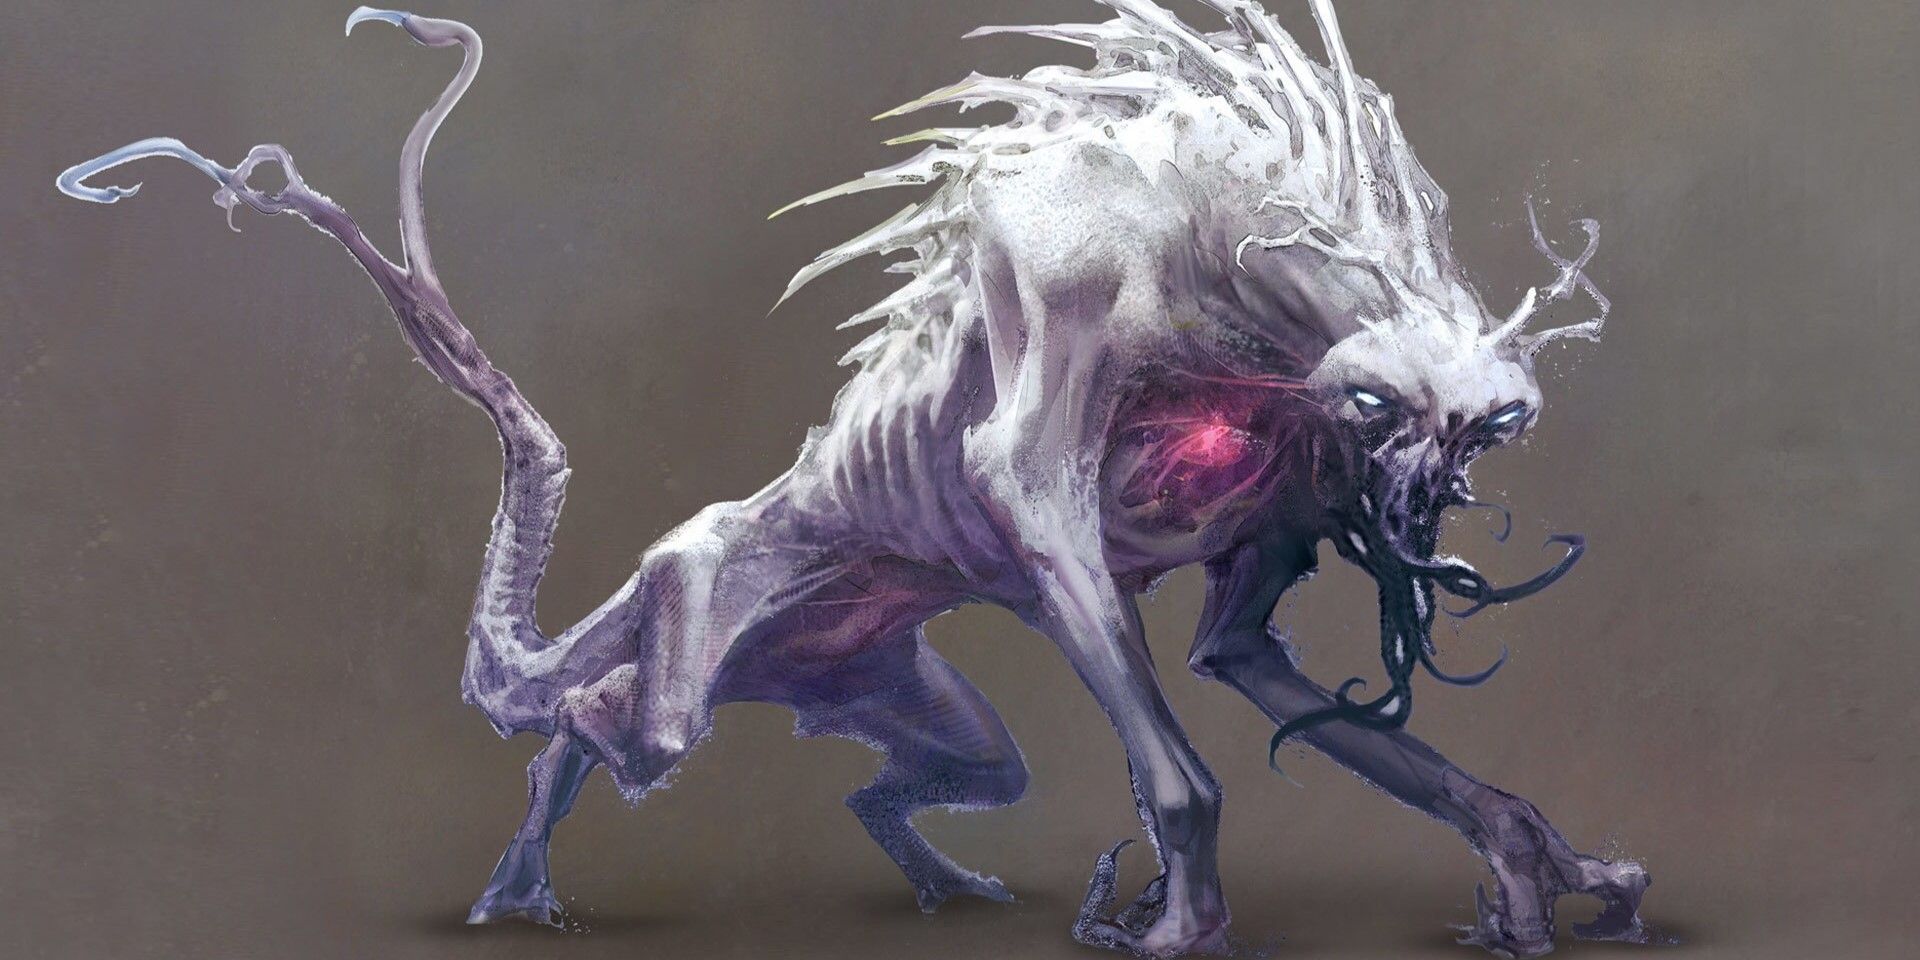 The Nameless, an enemy of the Jedi during the High Republic that could feed on the Force